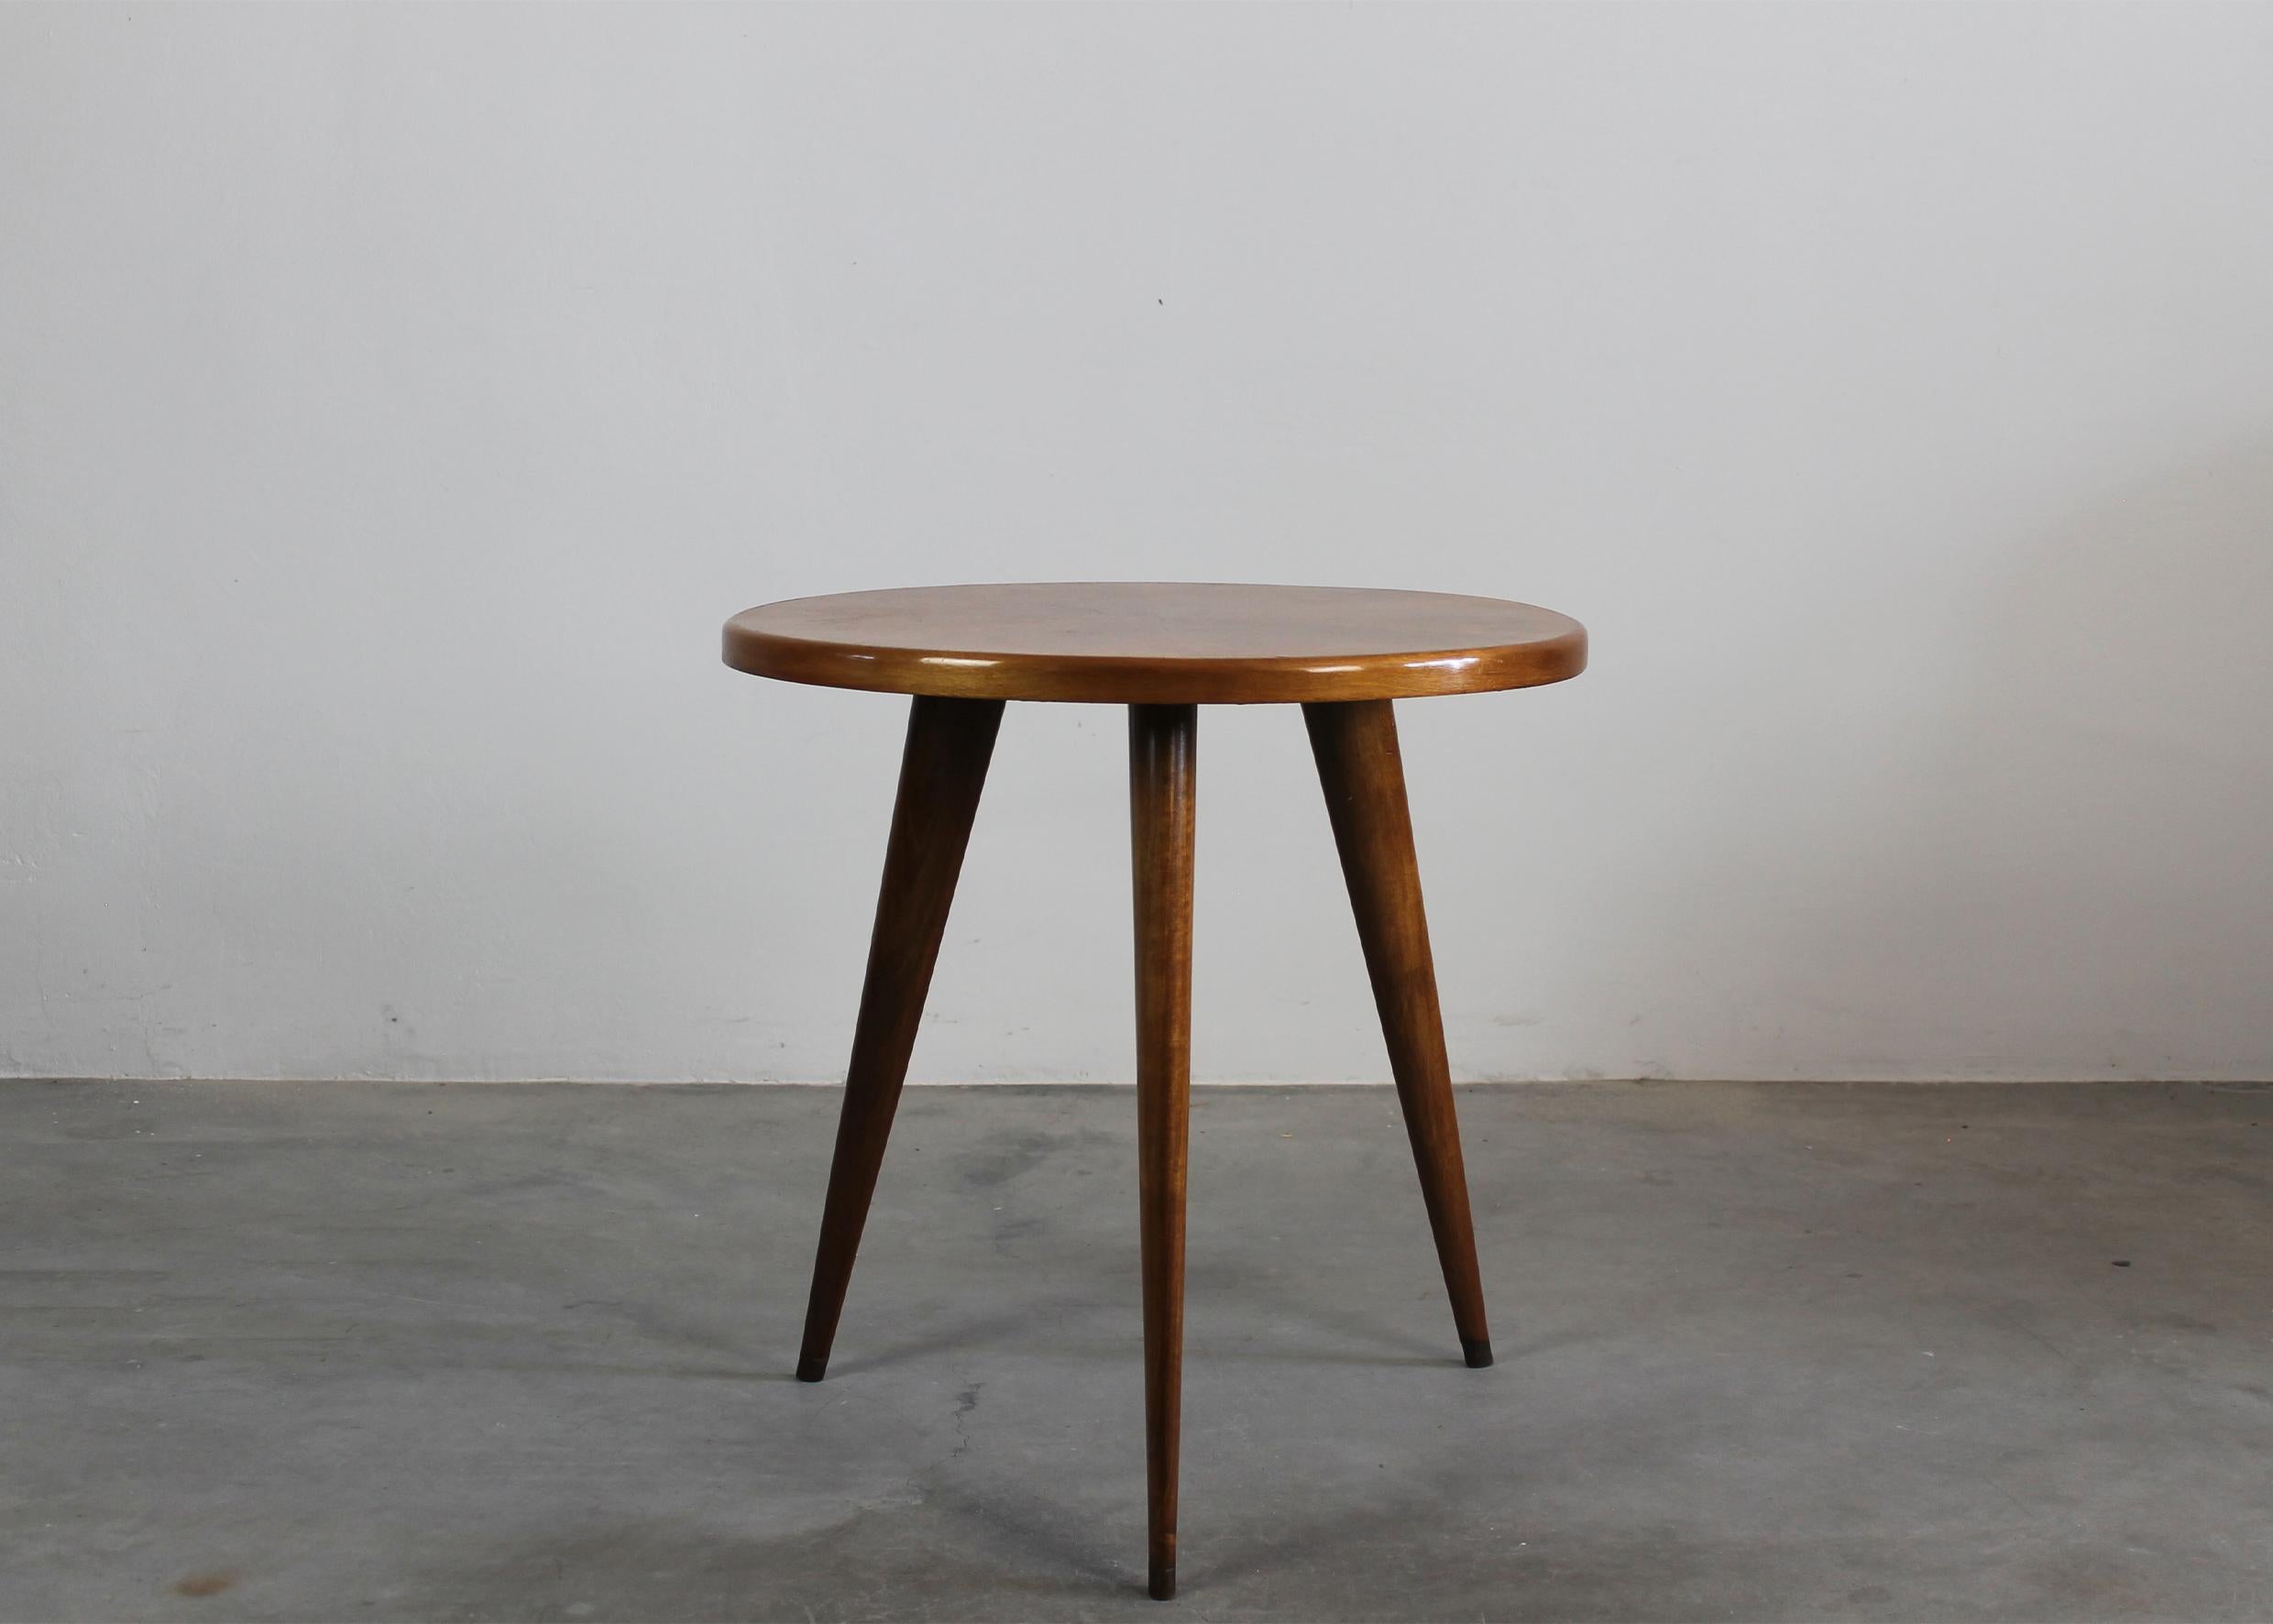 Round shaped coffee table with three legs, in walnut wood and brass details.
Attribuited to Gio Ponti, Italian manufacture from the late 1940s to the early 1950s 

Gio Ponti was an icon of the modernist movement: the Italian designer, architect,